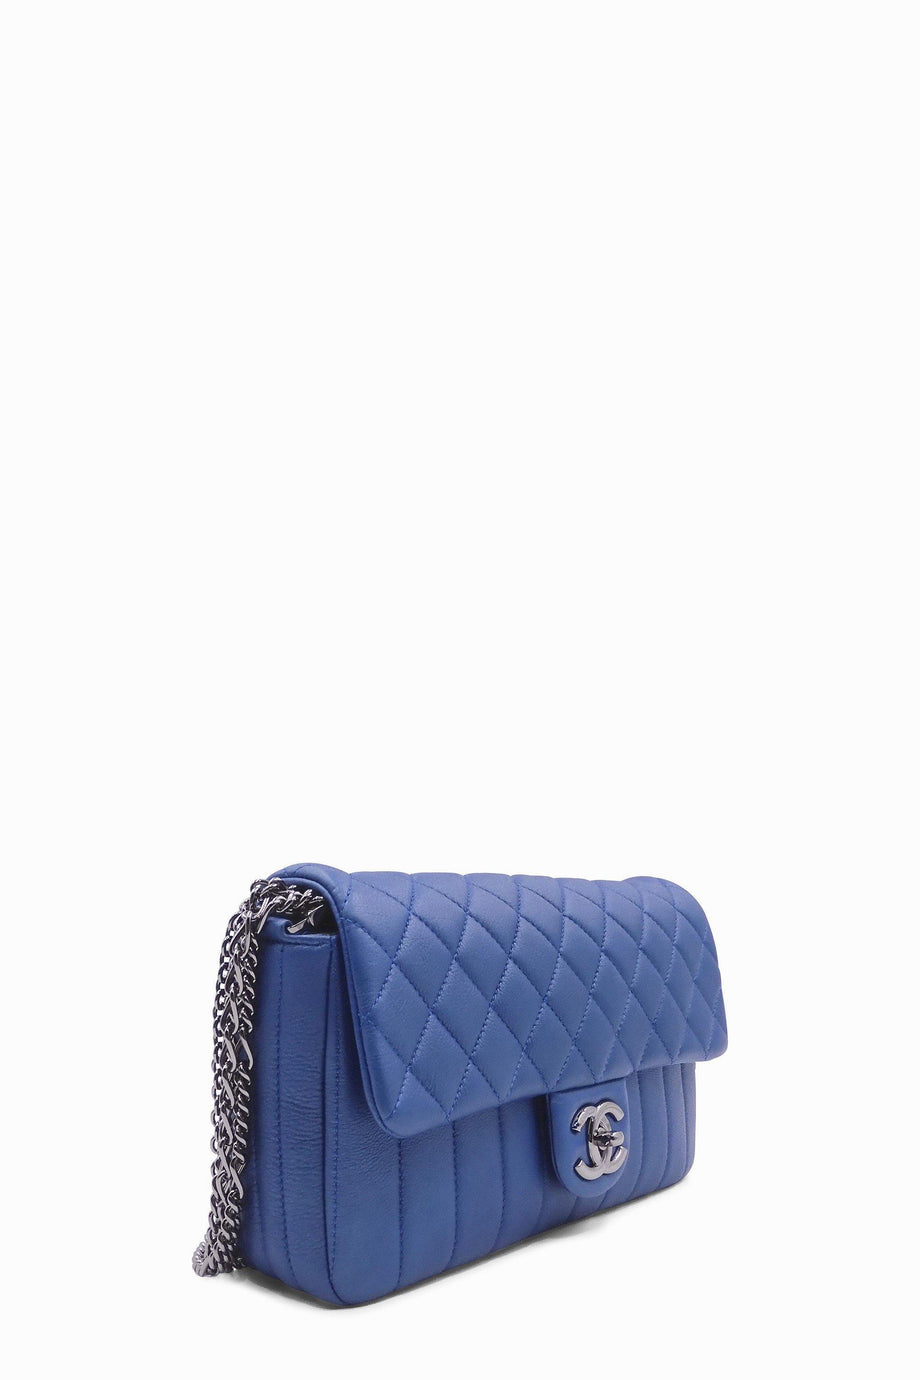 Chanel Black Quilted Leather Mini Multichain Flap Bag